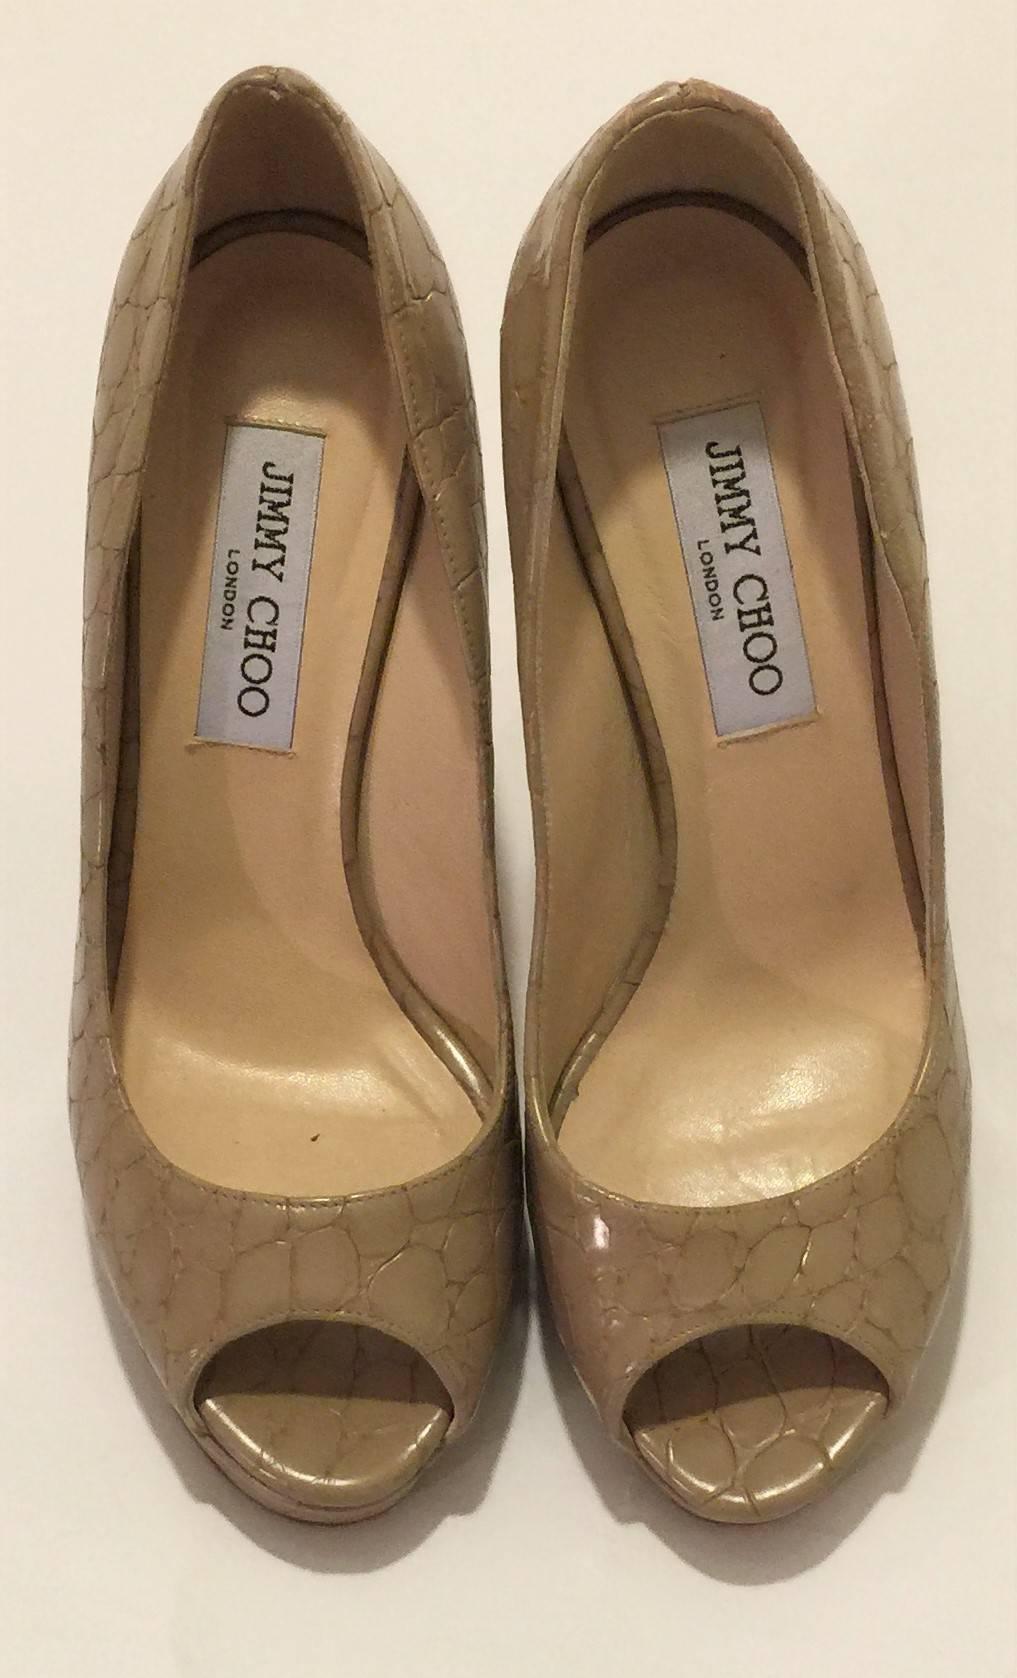 Jimmy Choo Crown Mock Croc Platform Peep Toe Pumps.  Ultra Chic mock croc leather platform peep toes MUST HAVES.  Colour beige.  Made in ITALY.  Size is EU38.  Heel height is 13cm.  Platform is 2.5cm.  Good Pre-Owned, condition gently used, scuffs